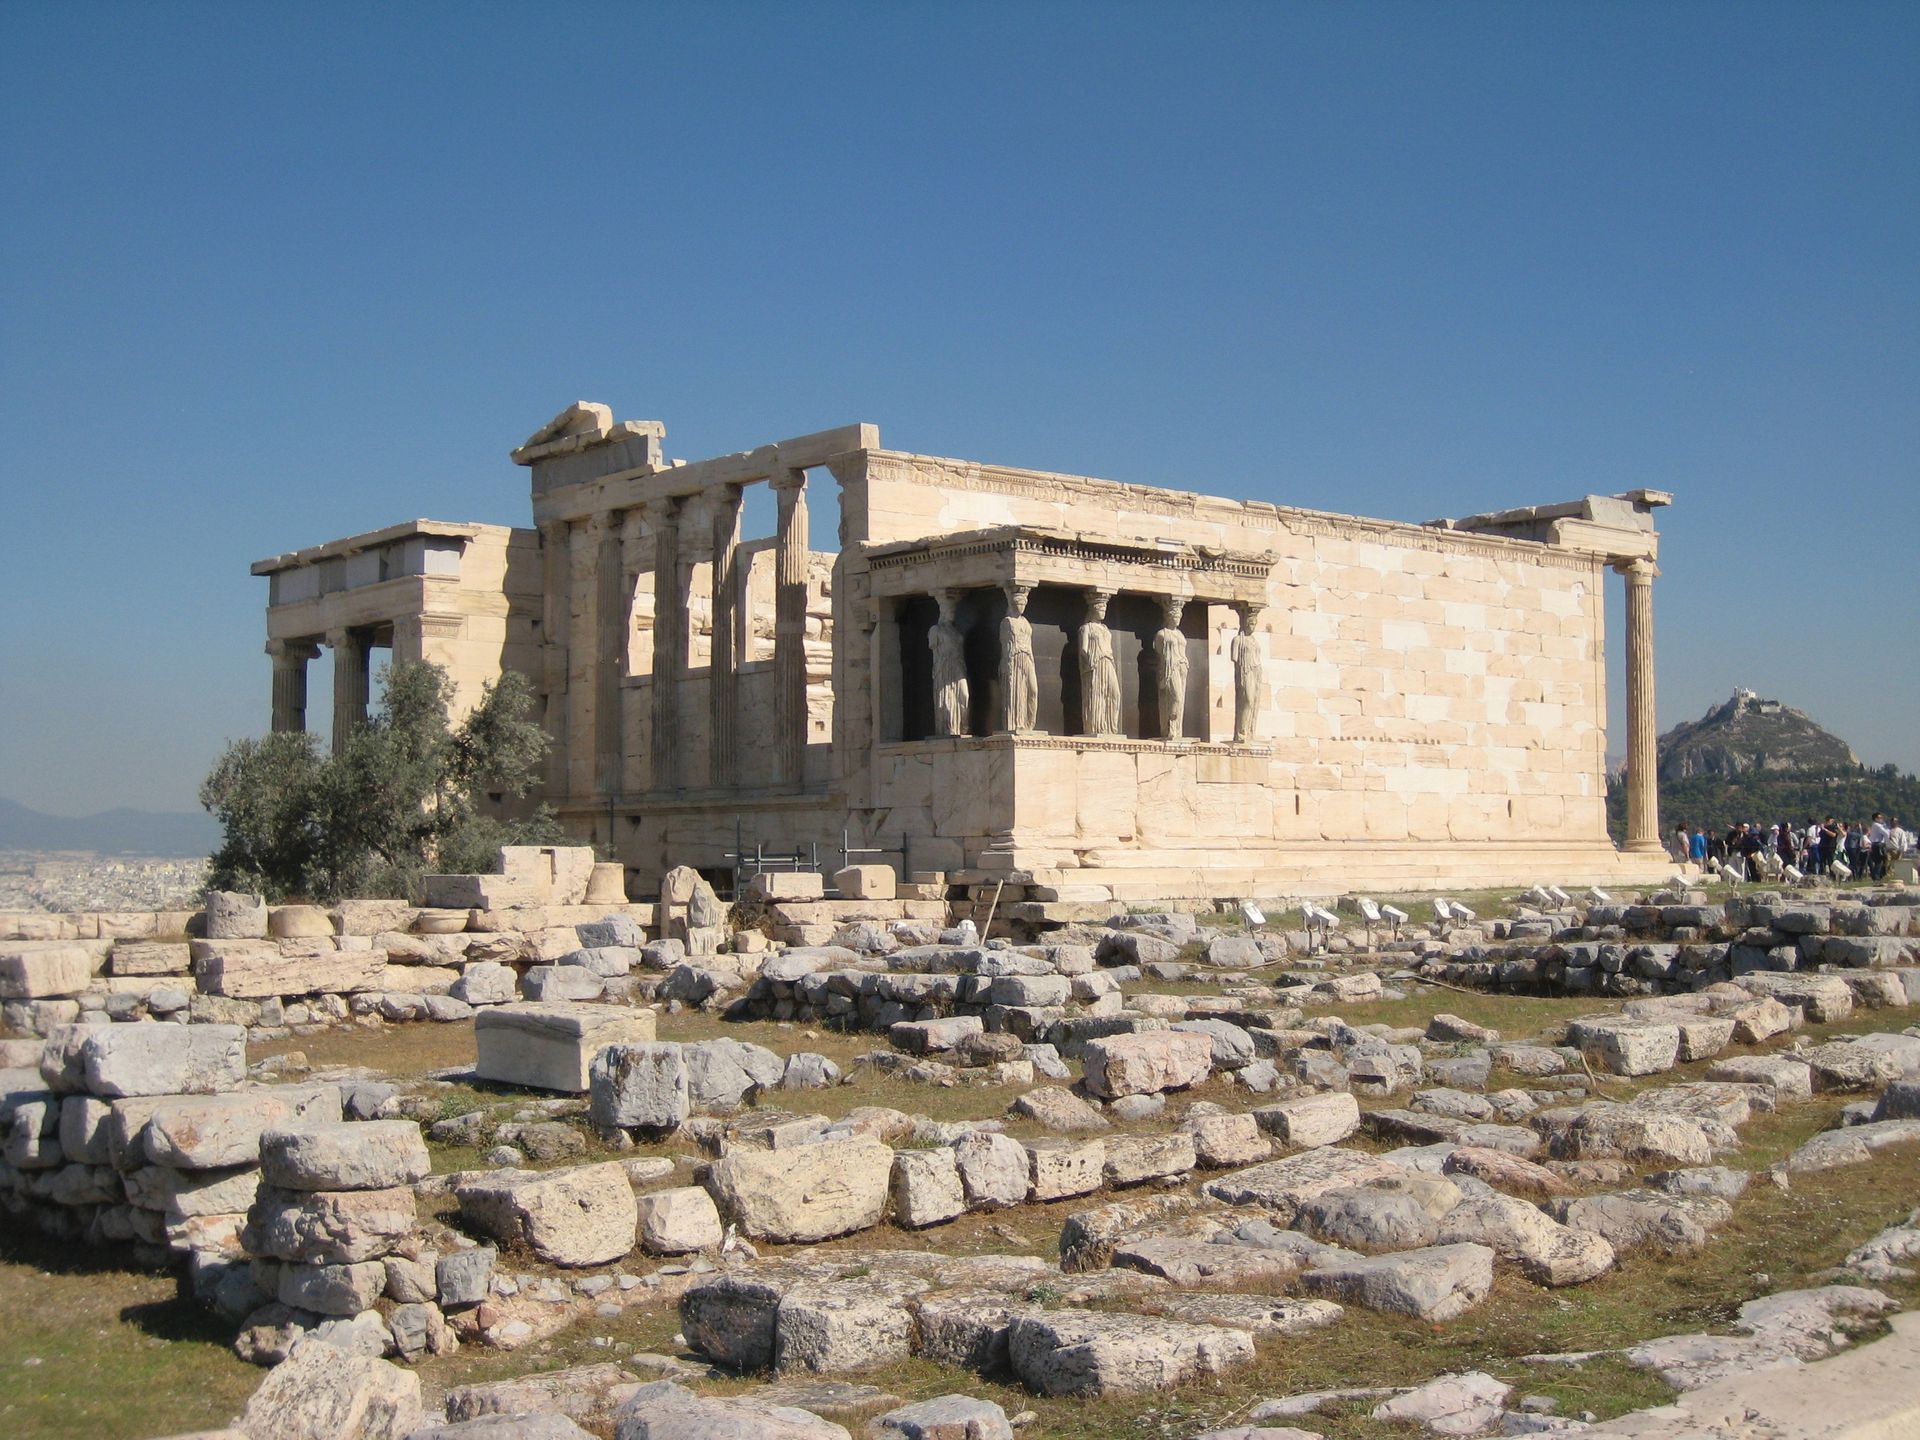 The Erechtheion was a Greek temple built in the late fifth century BC on the north site of the Acropolis.